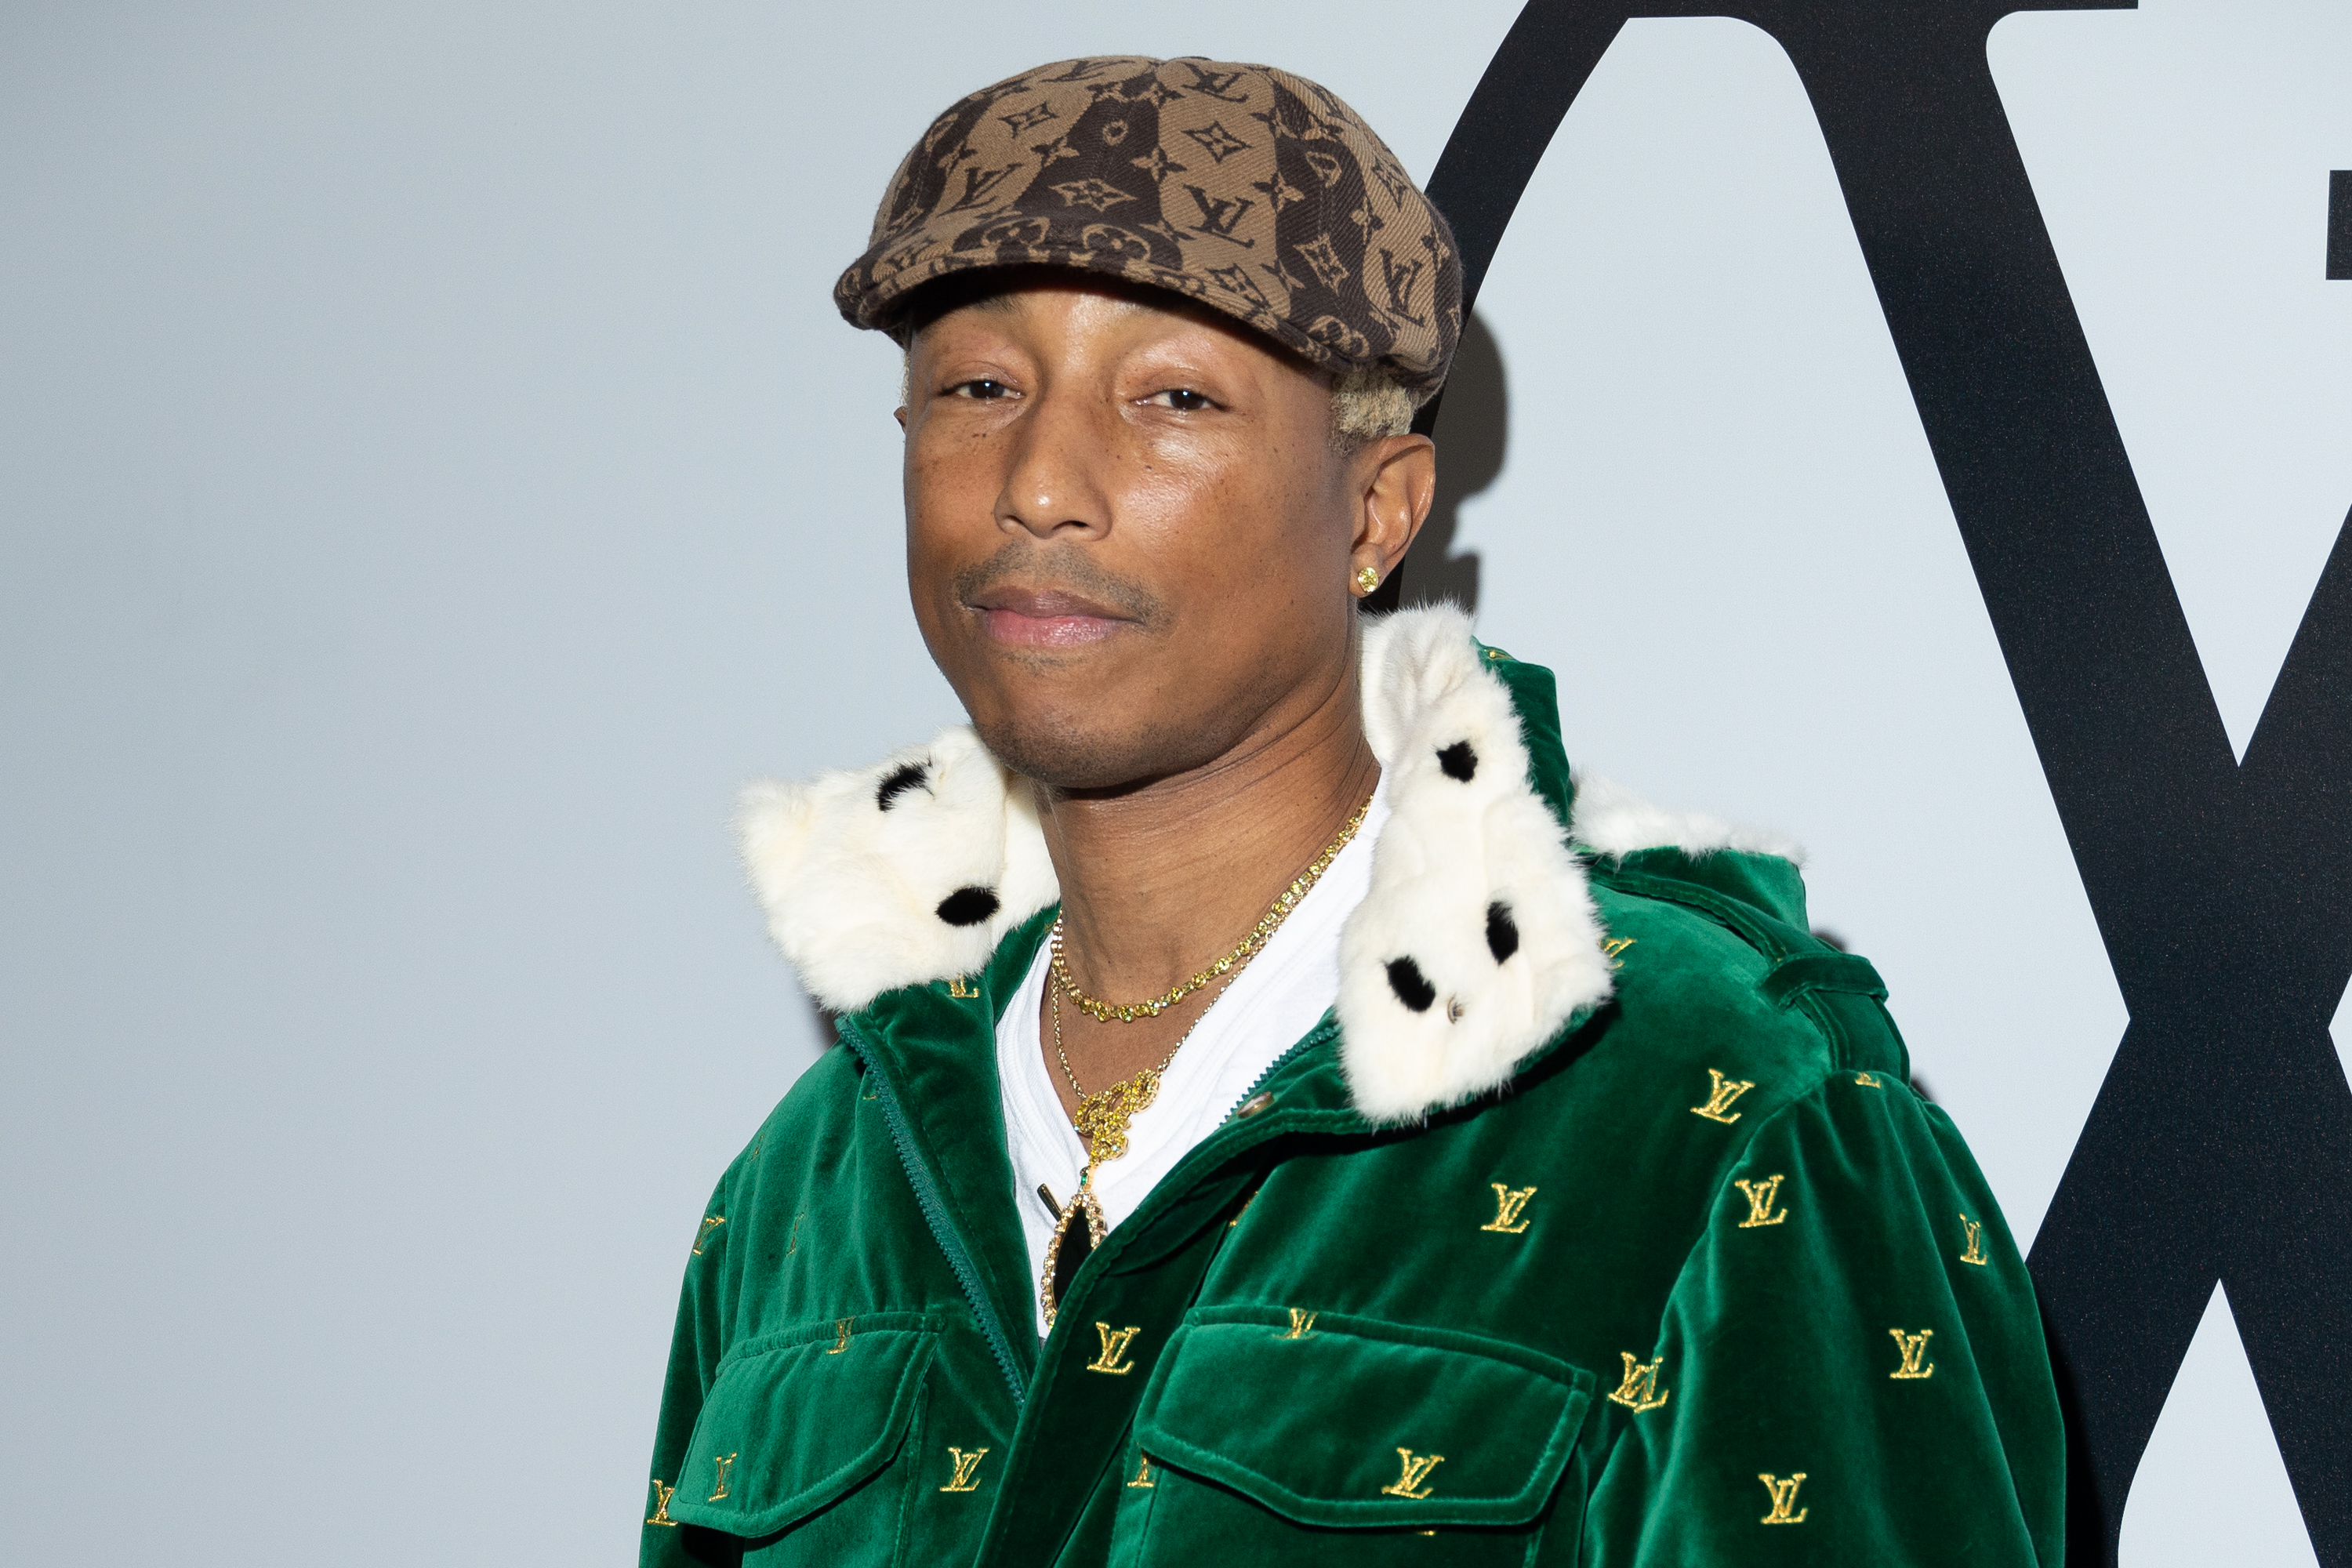 Pharrell Williams has been accused of seeking sole control over the trademarks of former production duo The Neptunes